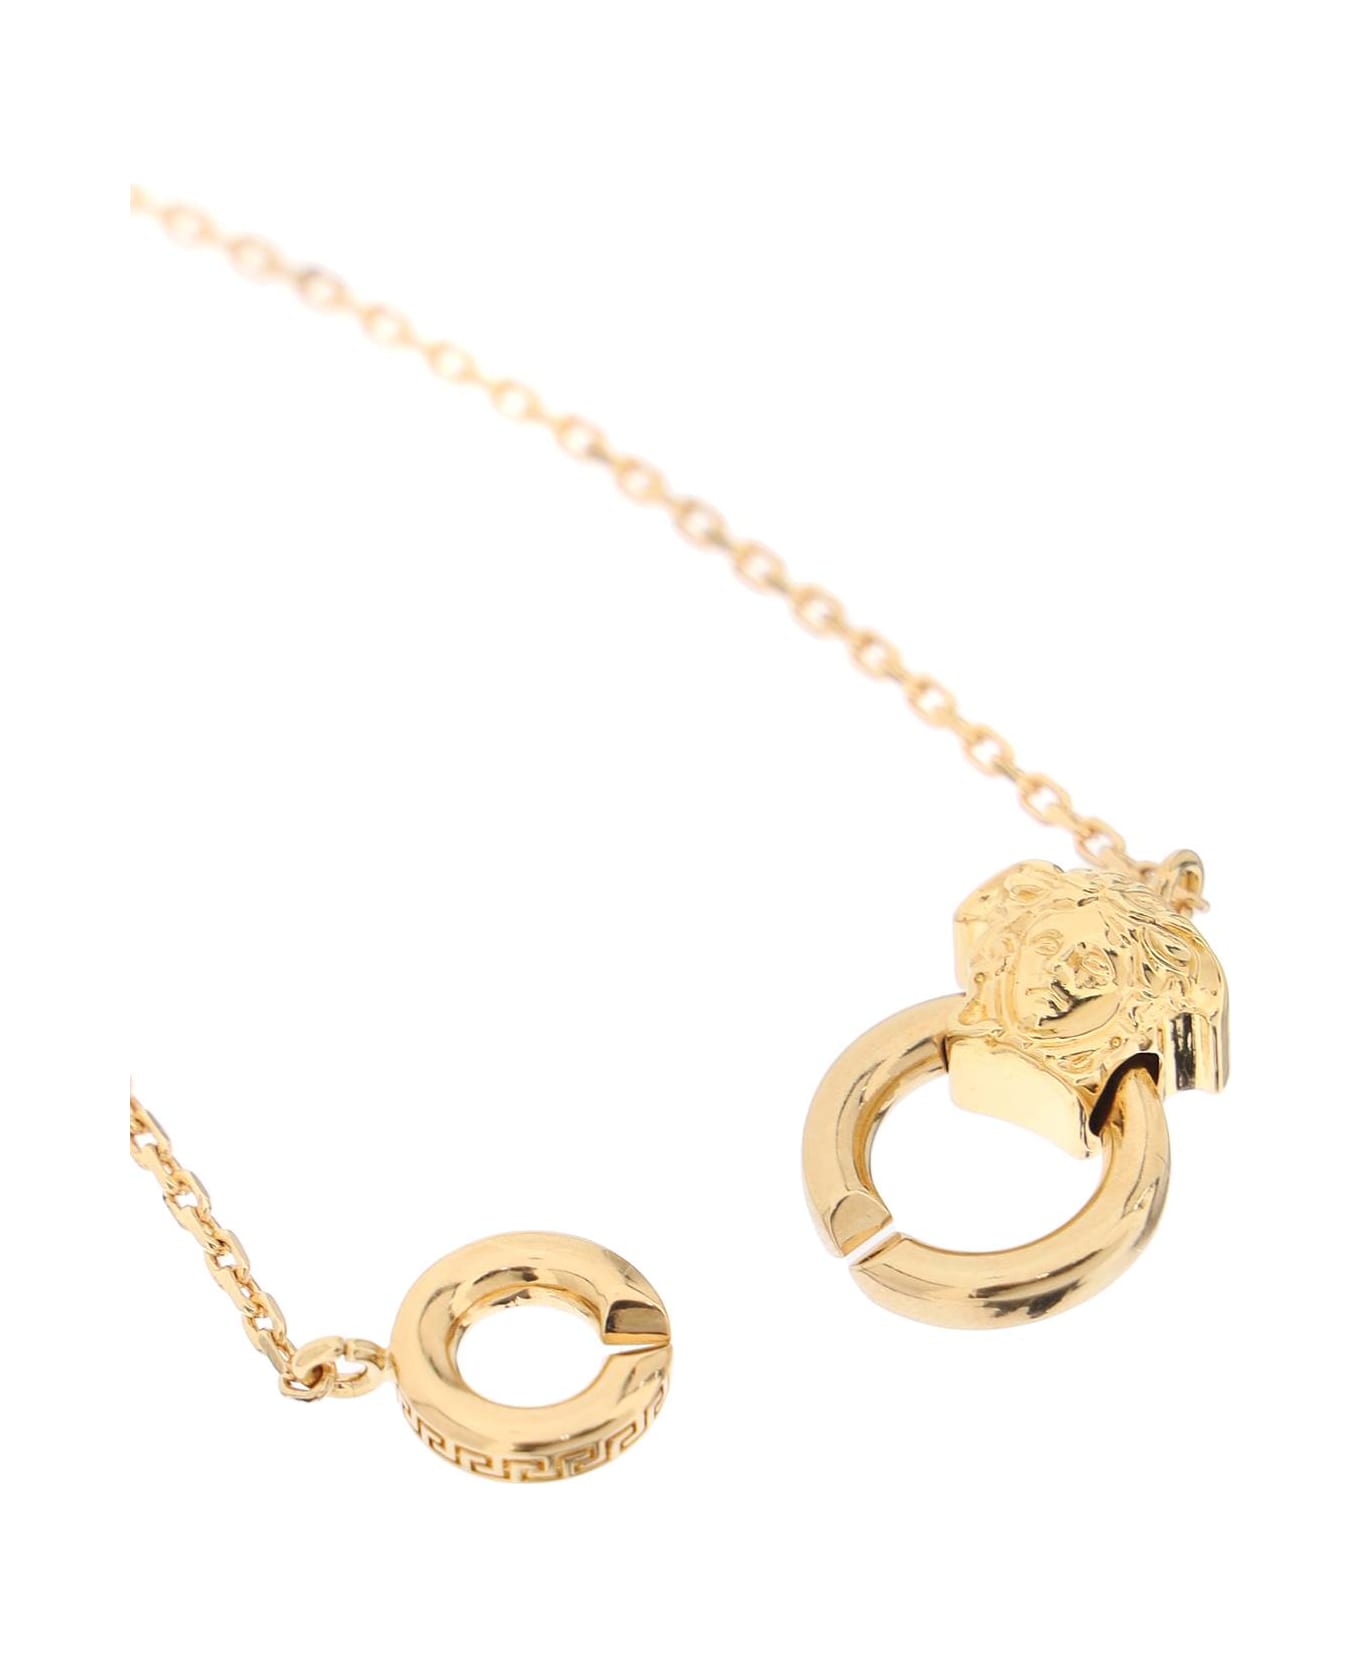 Versace Medusa Rolo-chained Polished Finish Necklace - VERSACE GOLD (Gold) ネックレス